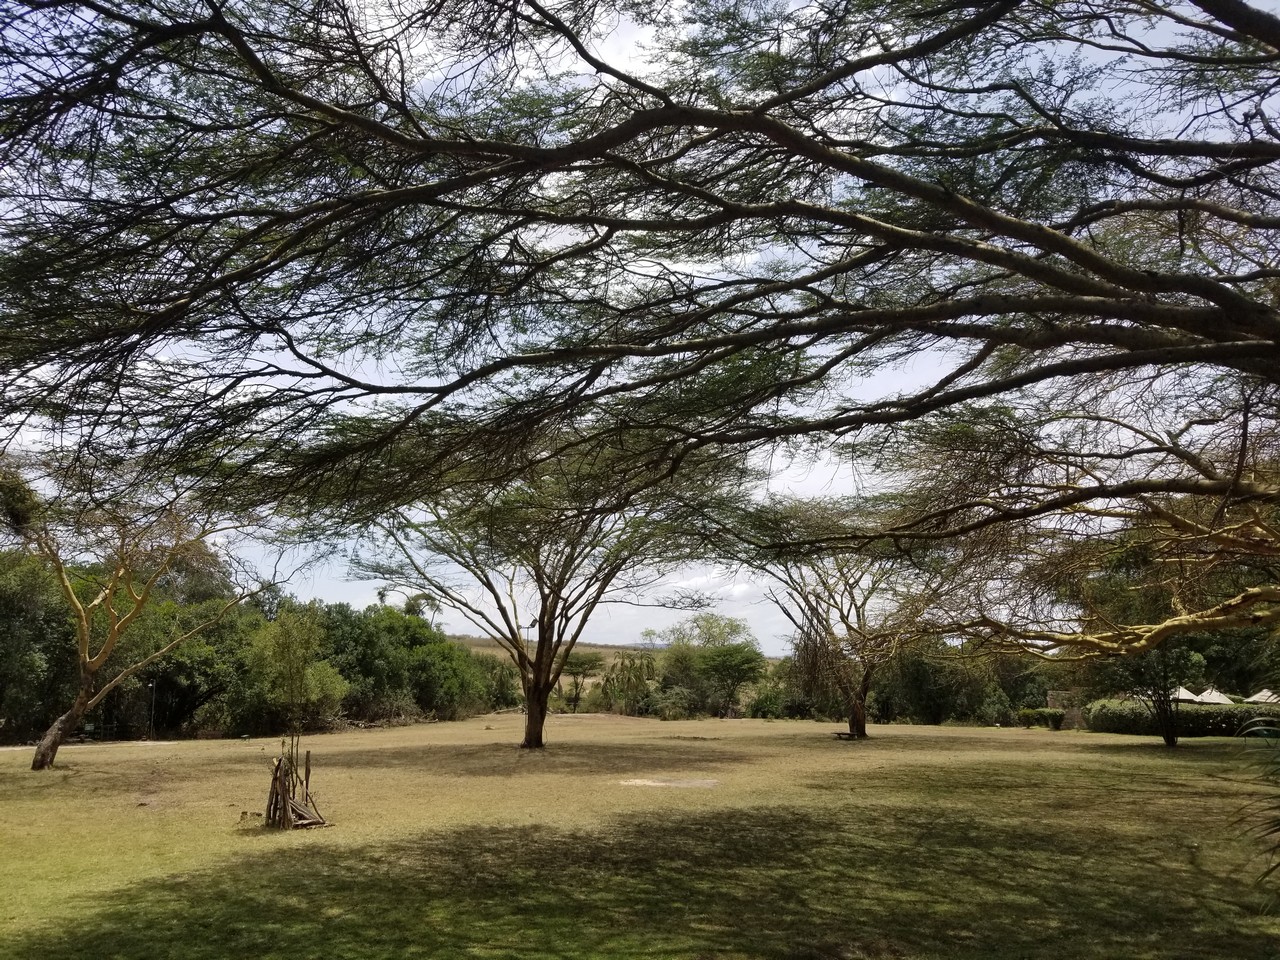 a group of trees in a grassy area